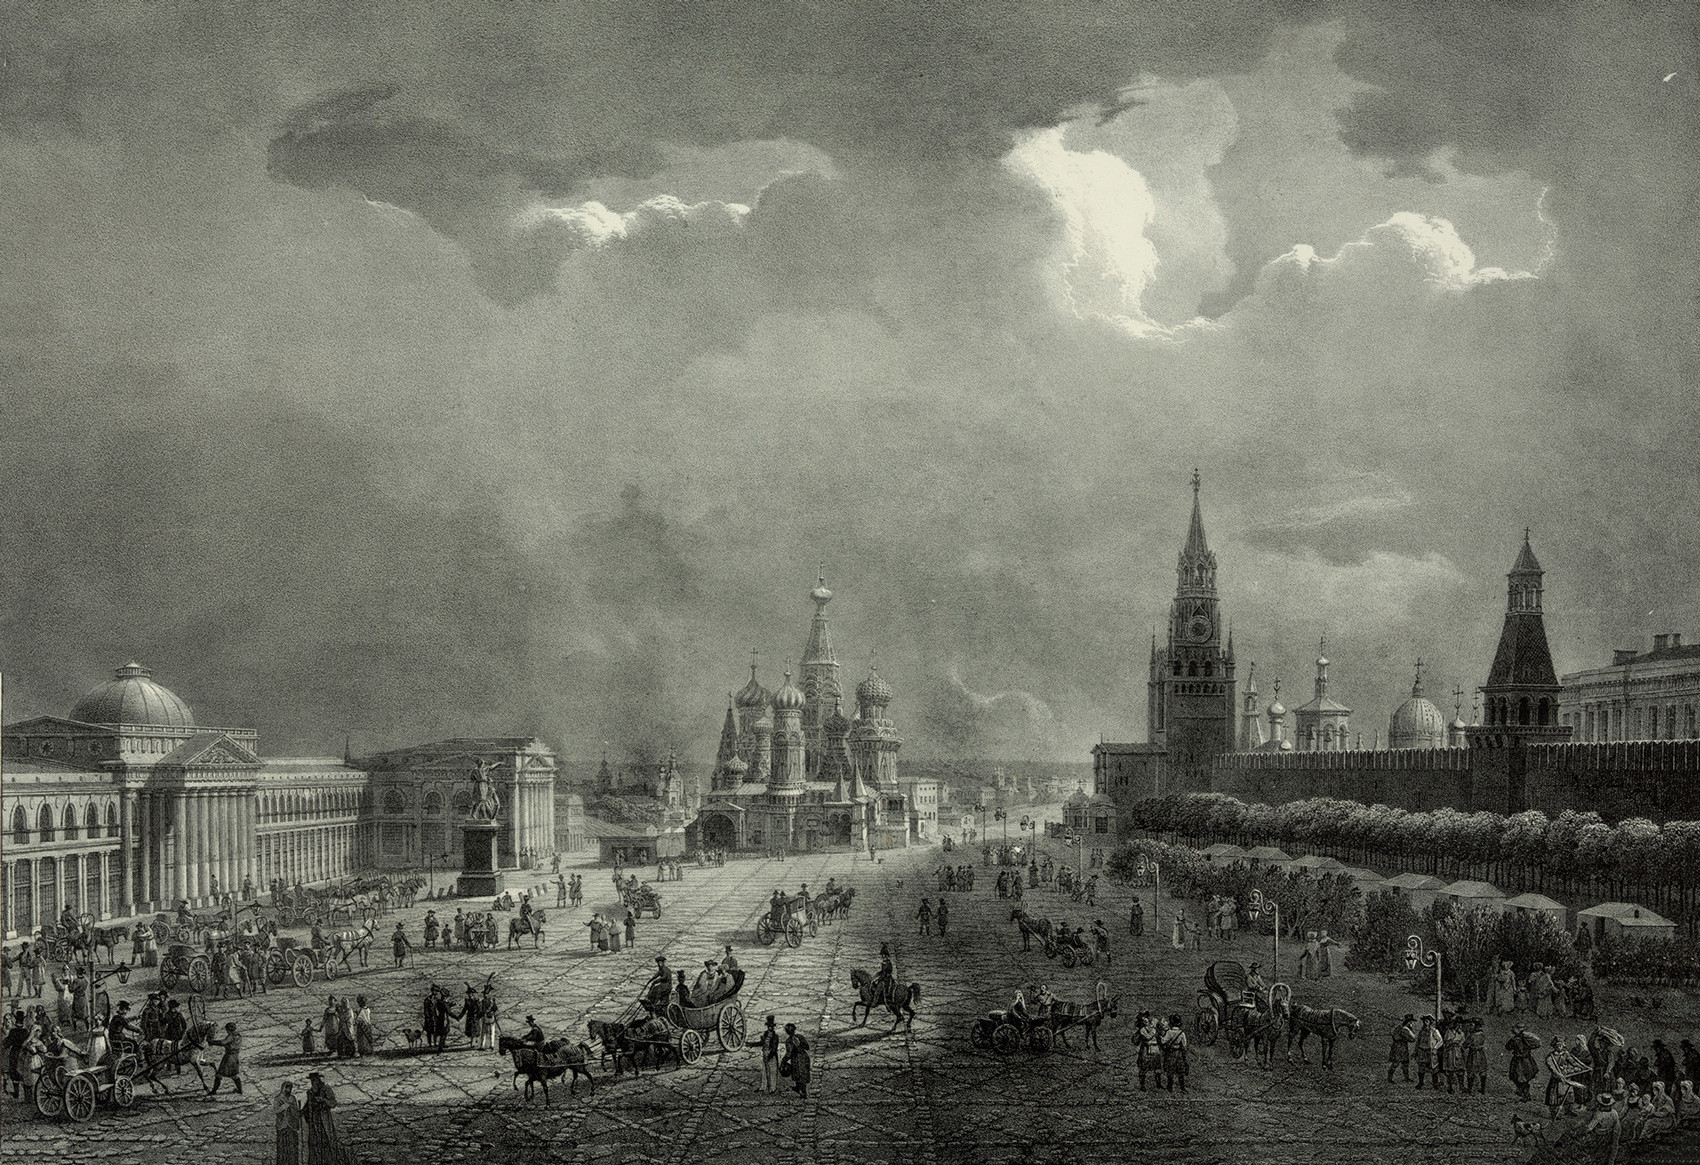 Upper Trading Rows at the Red Square in Moscow, c. 1830.